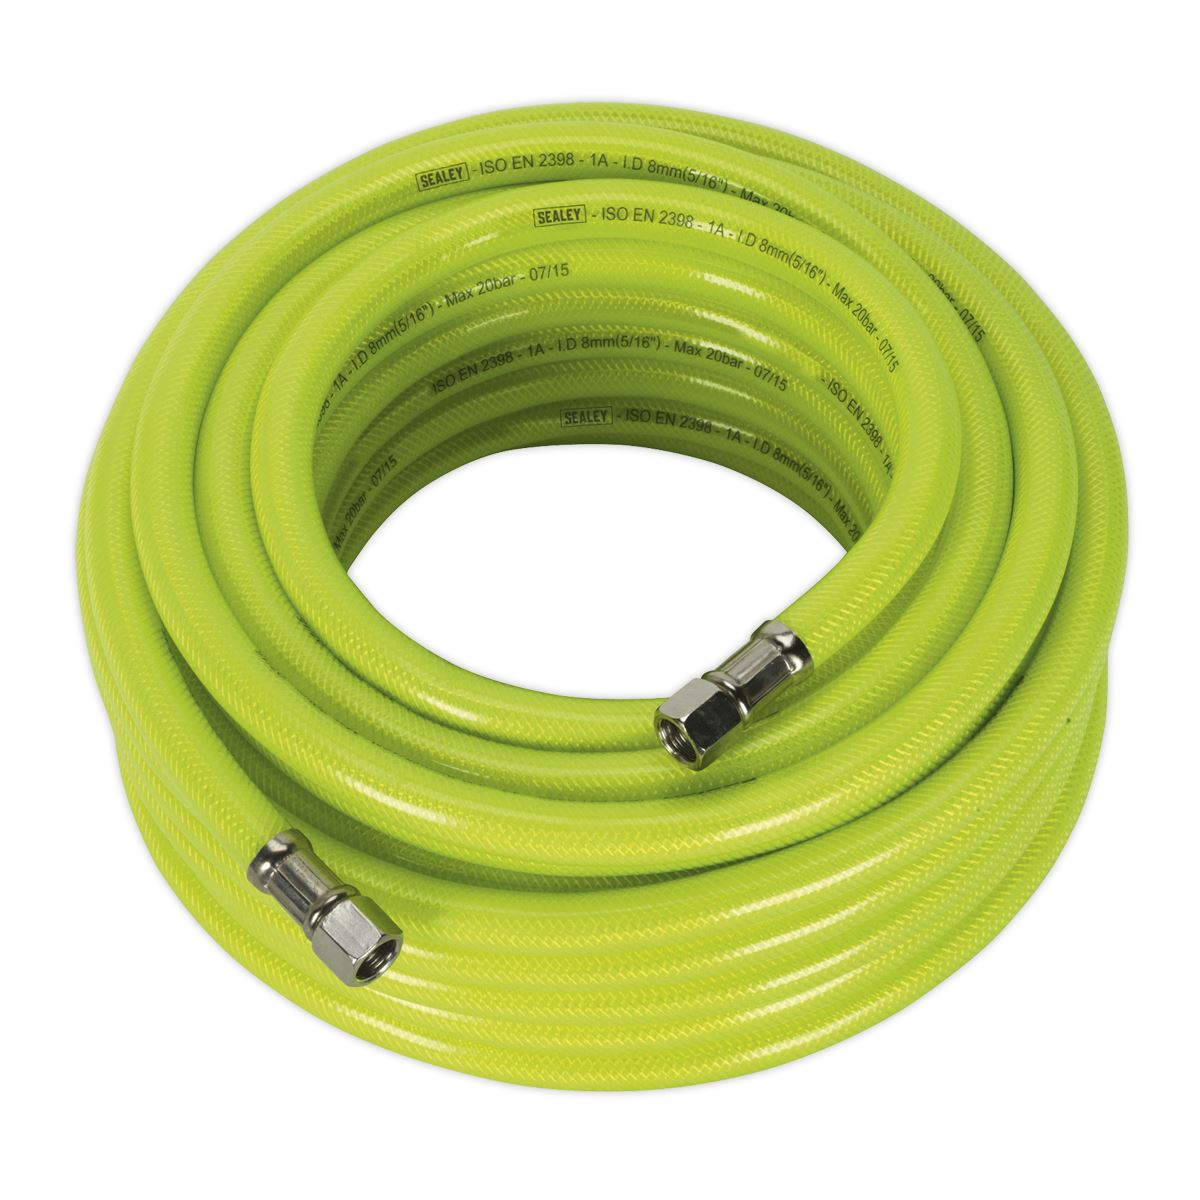 Sealey Air Hose High-Visibility 15m x Ø8mm with 1/4"BSP Unions